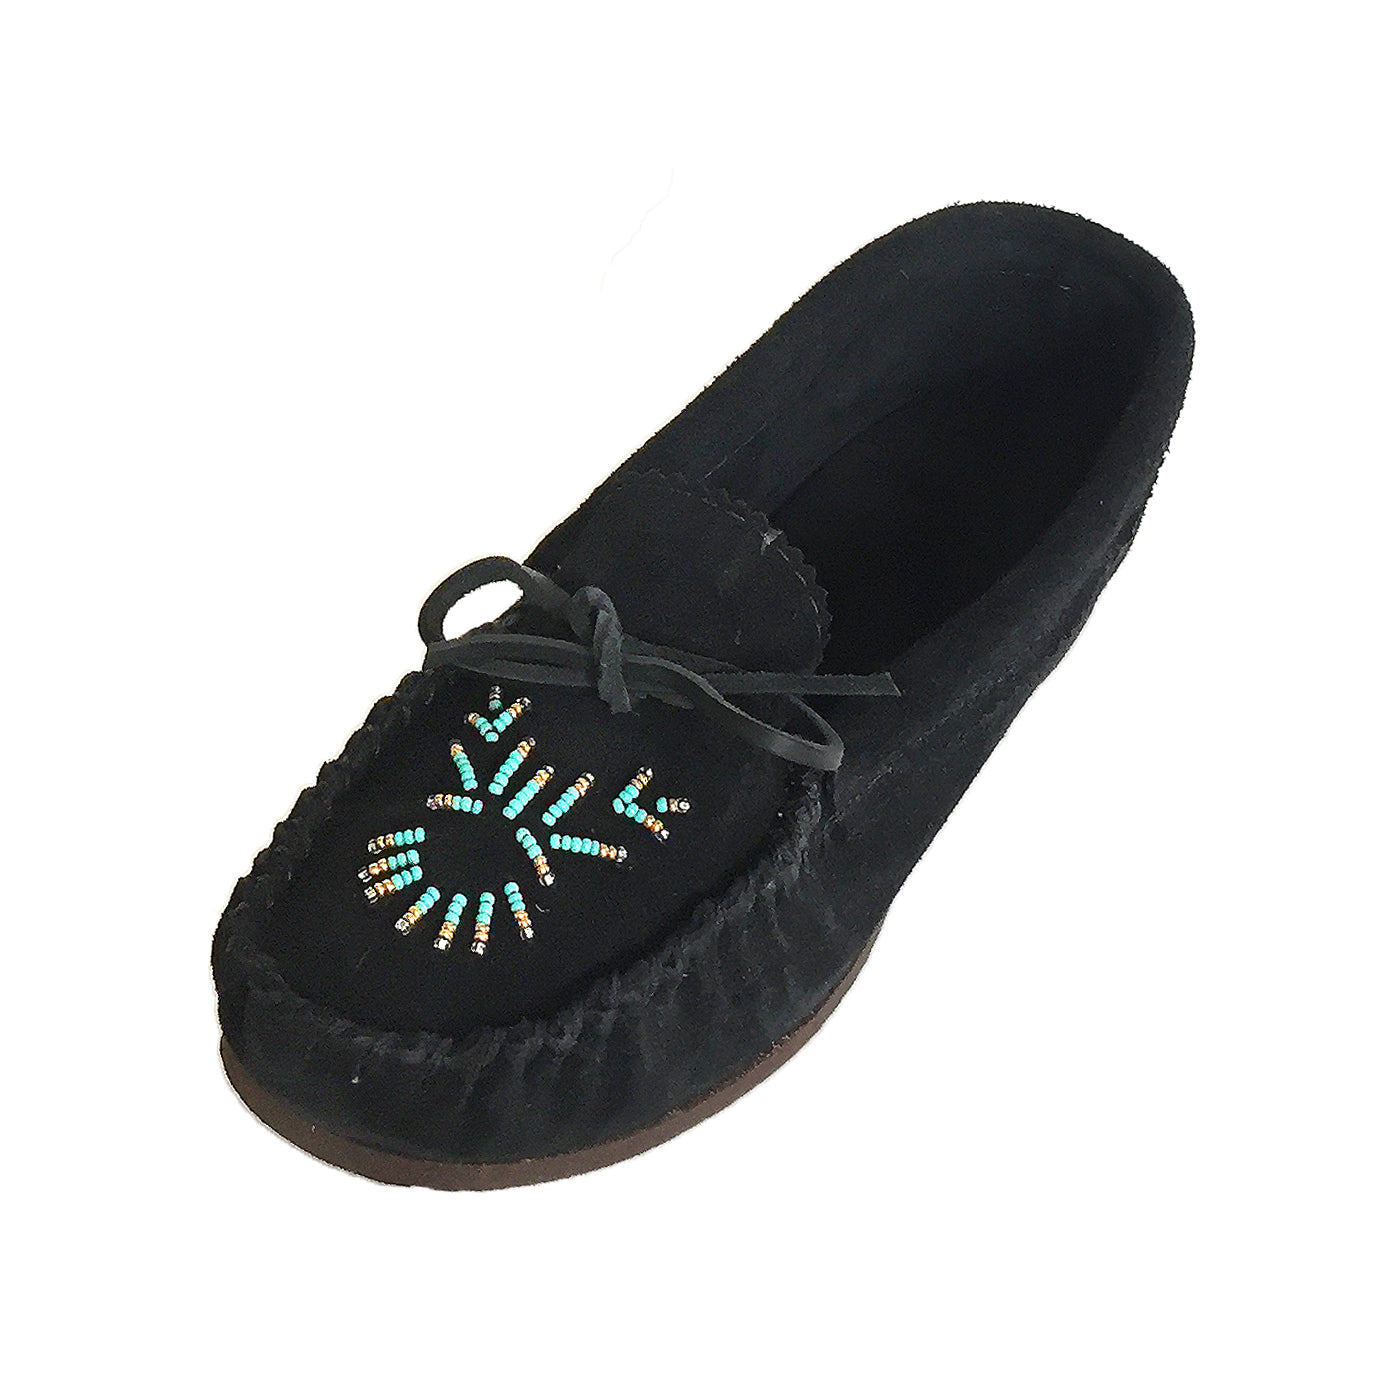 black leather moccasins womens